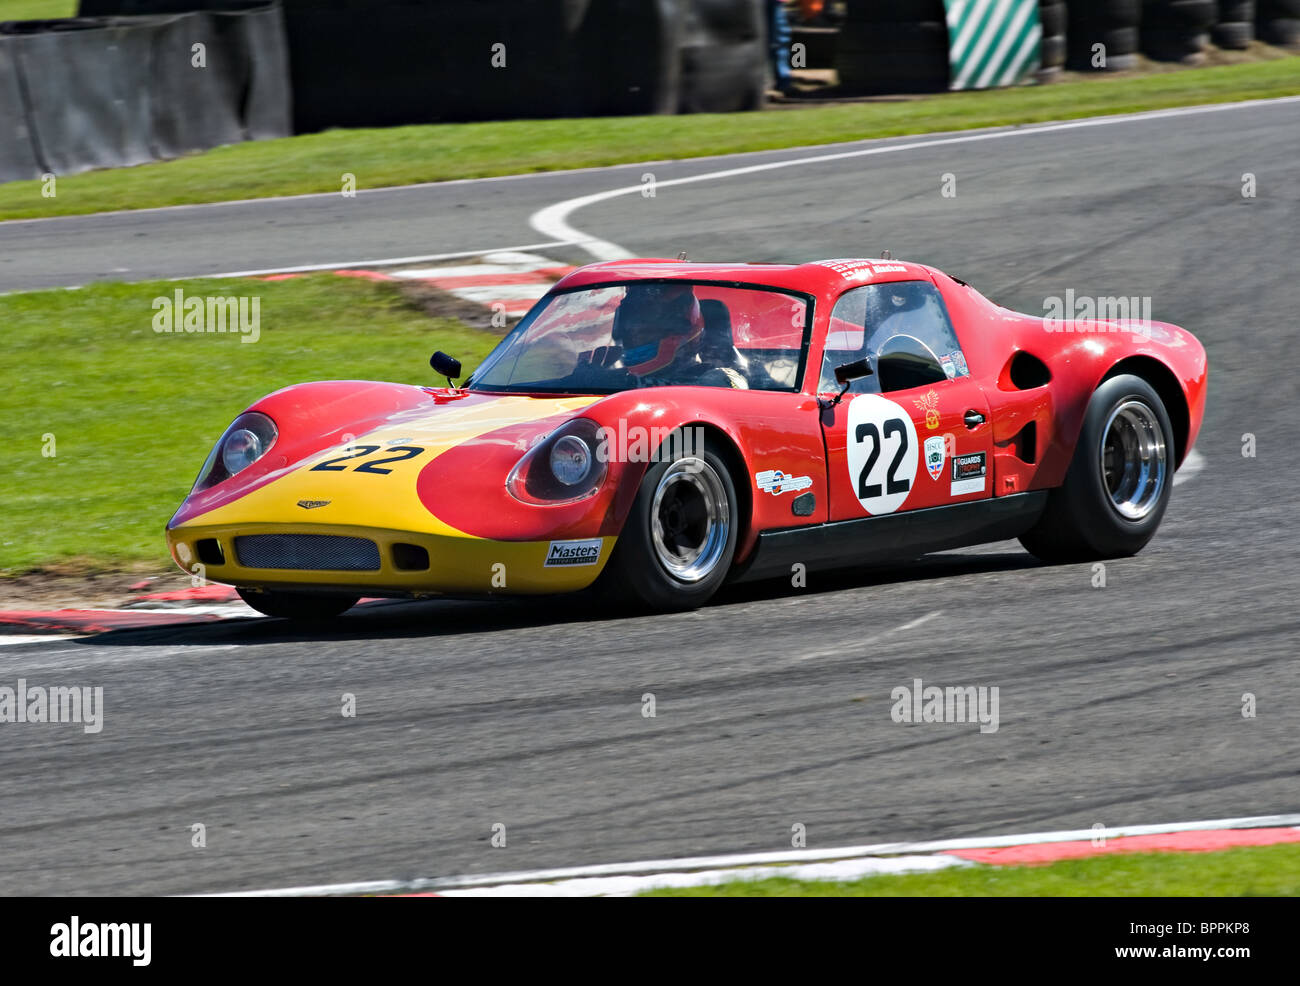 Chevron B8 Sports Race Car in Guards Trophy Race at Oulton Park Motor Racing Circuit Cheshire England United Kingdom UK Stock Photo